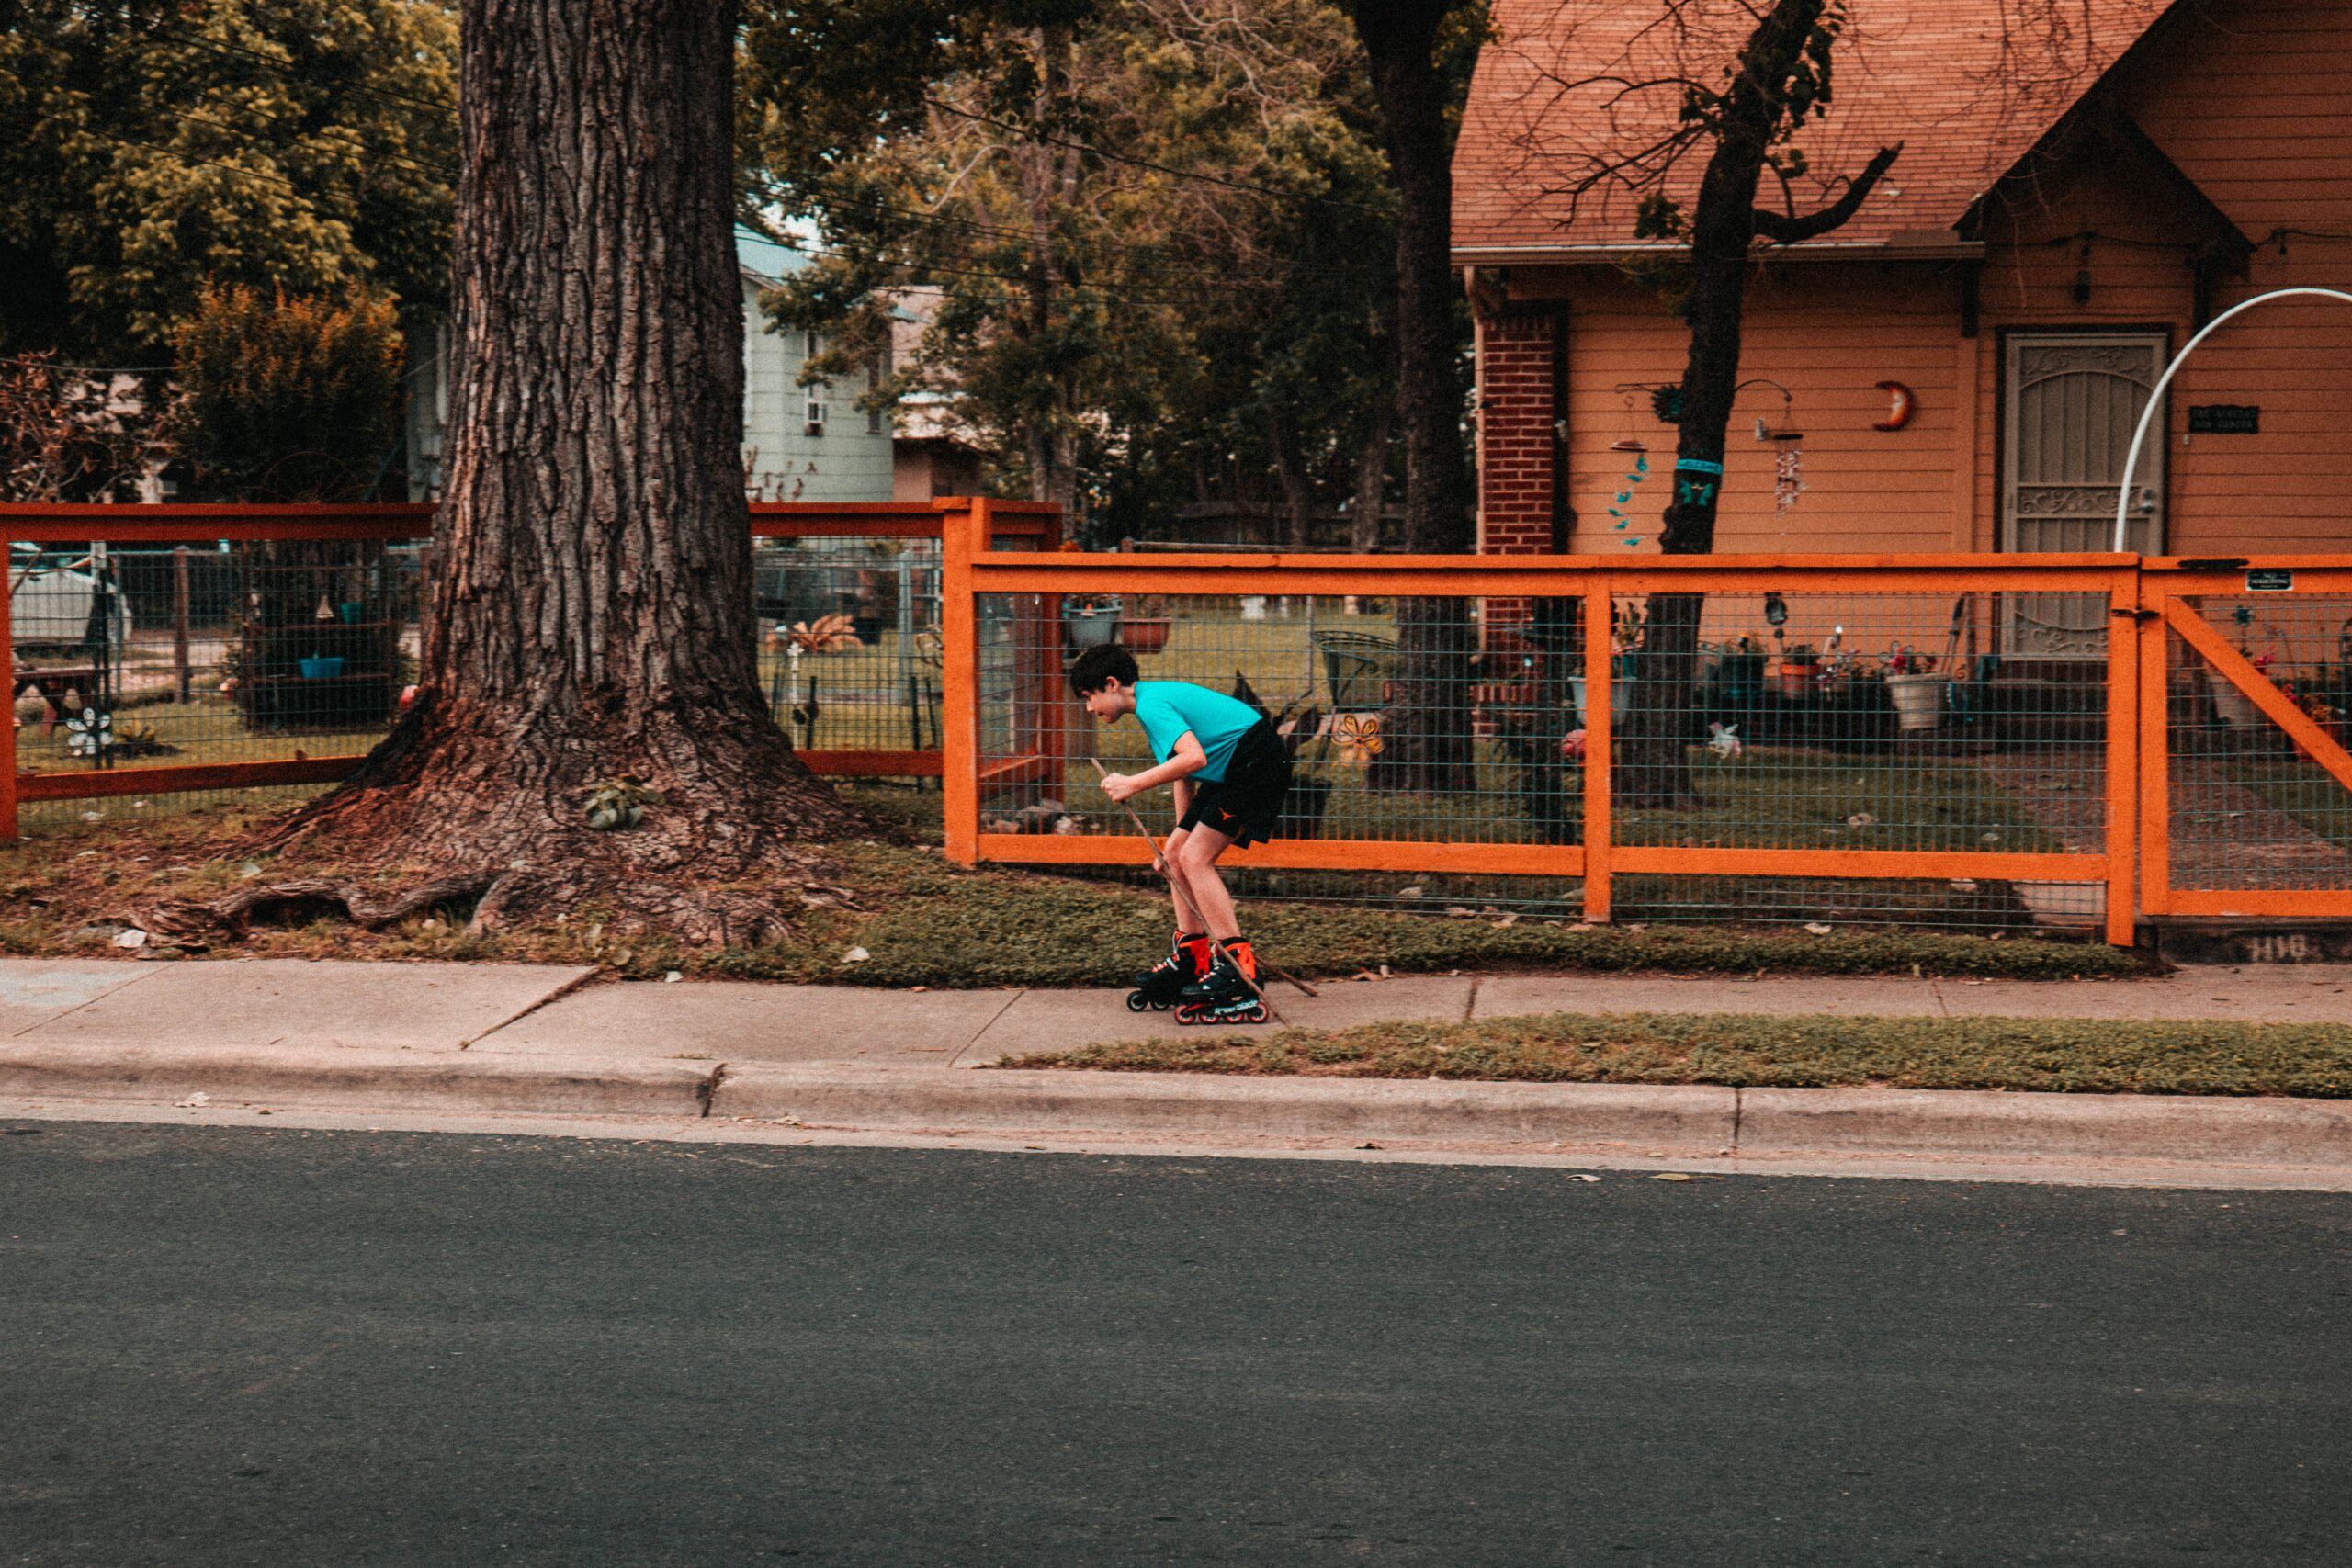 A boy rollerblading on the sidewalk near a large tree. Rollerblading is an inexpensive sport to participate in.